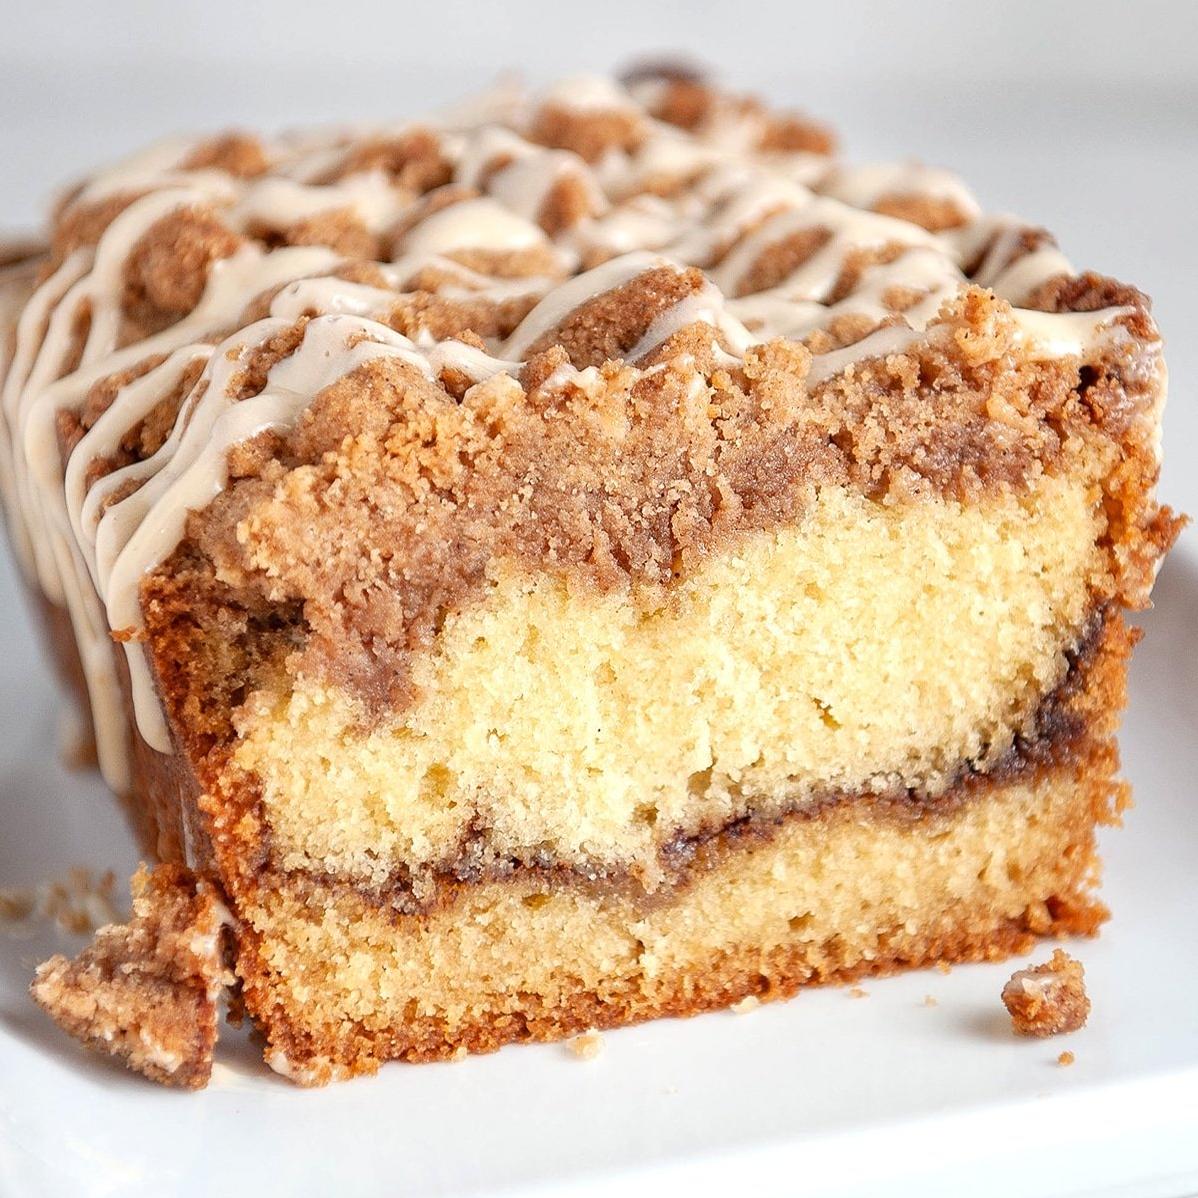  Enjoy a classic coffee cake with a generous amount of cinnamon.